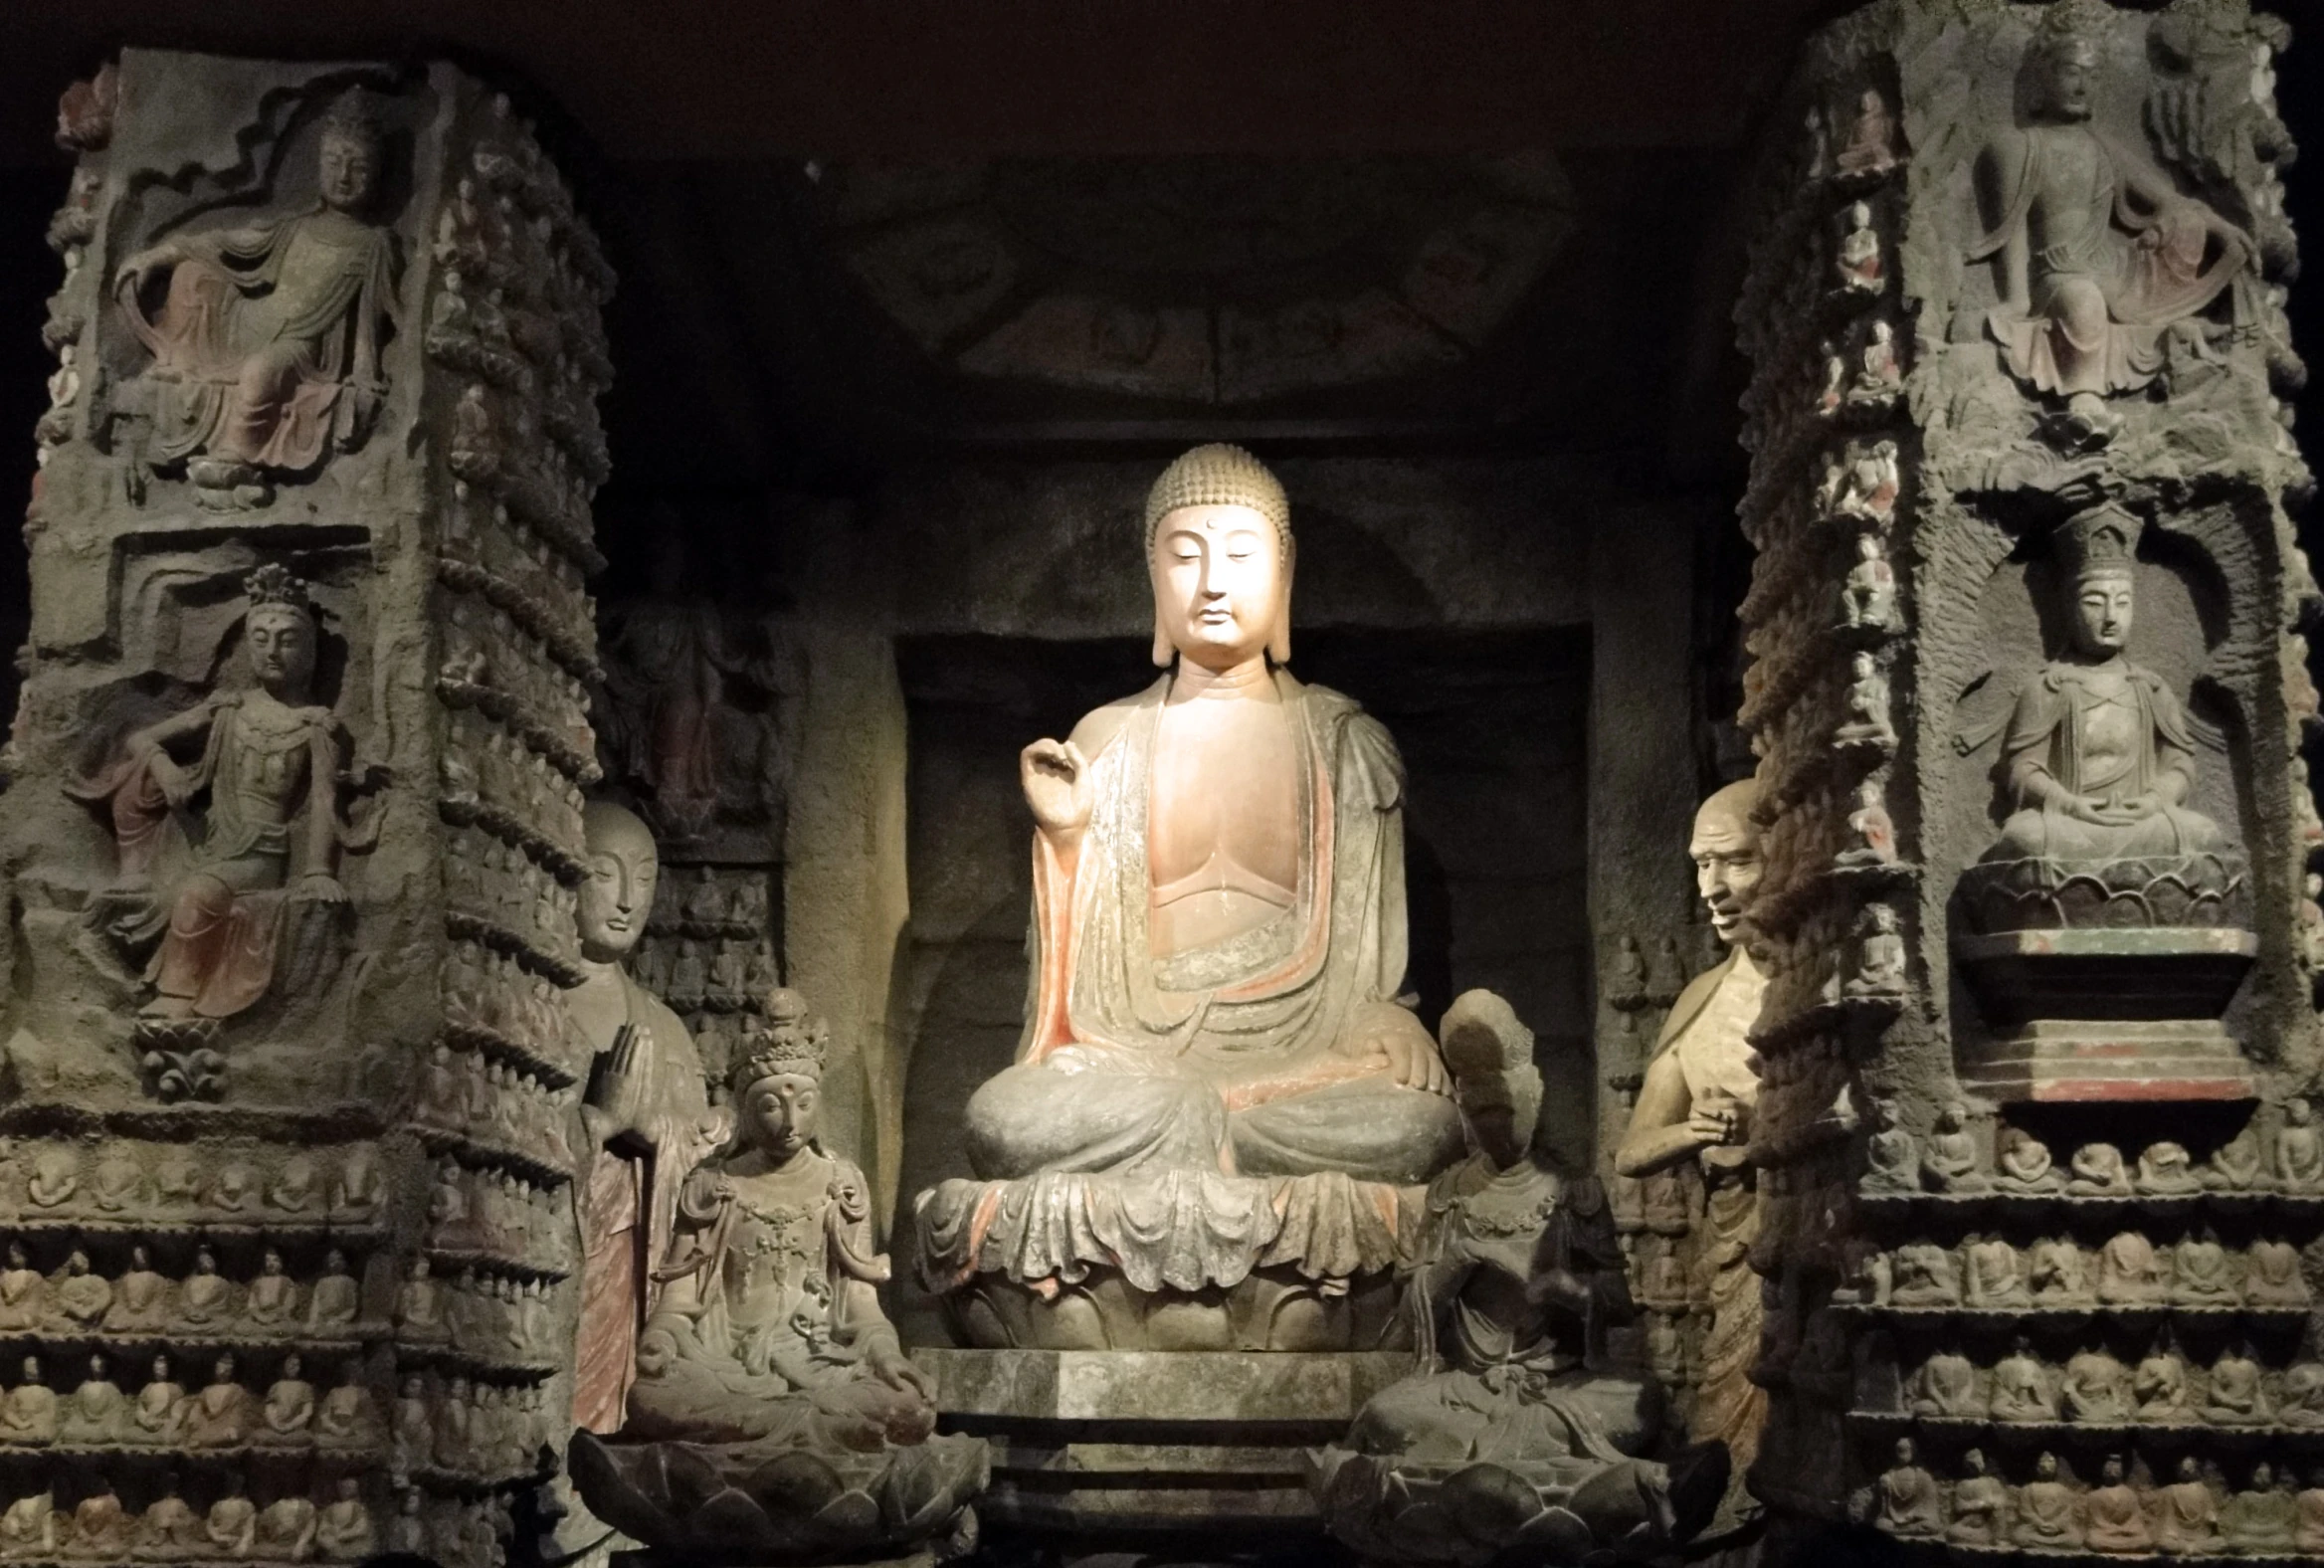 the statues of buddha and other ancient carvings